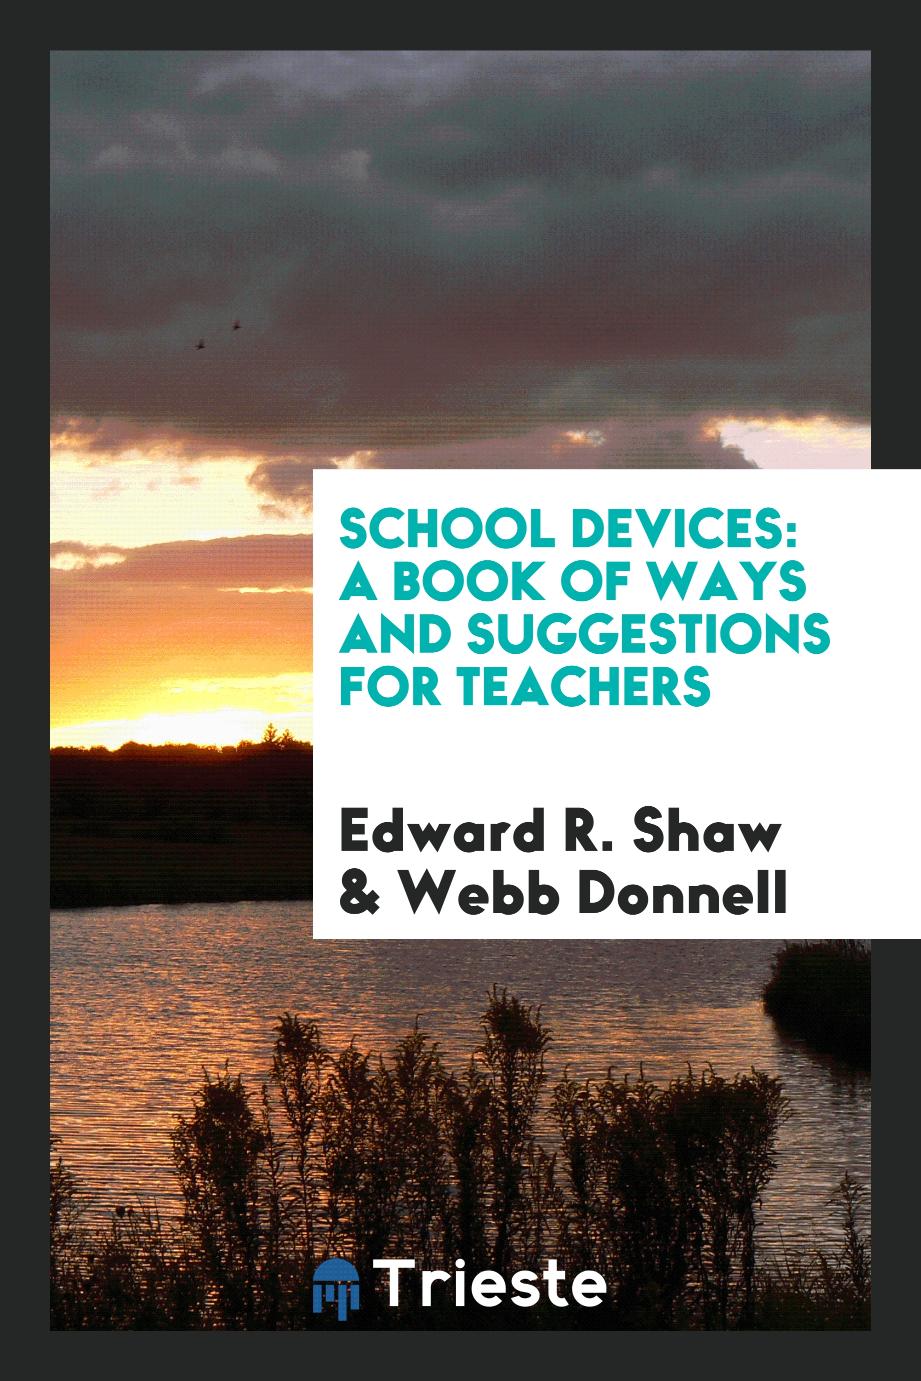 School Devices: A Book of Ways and Suggestions for Teachers